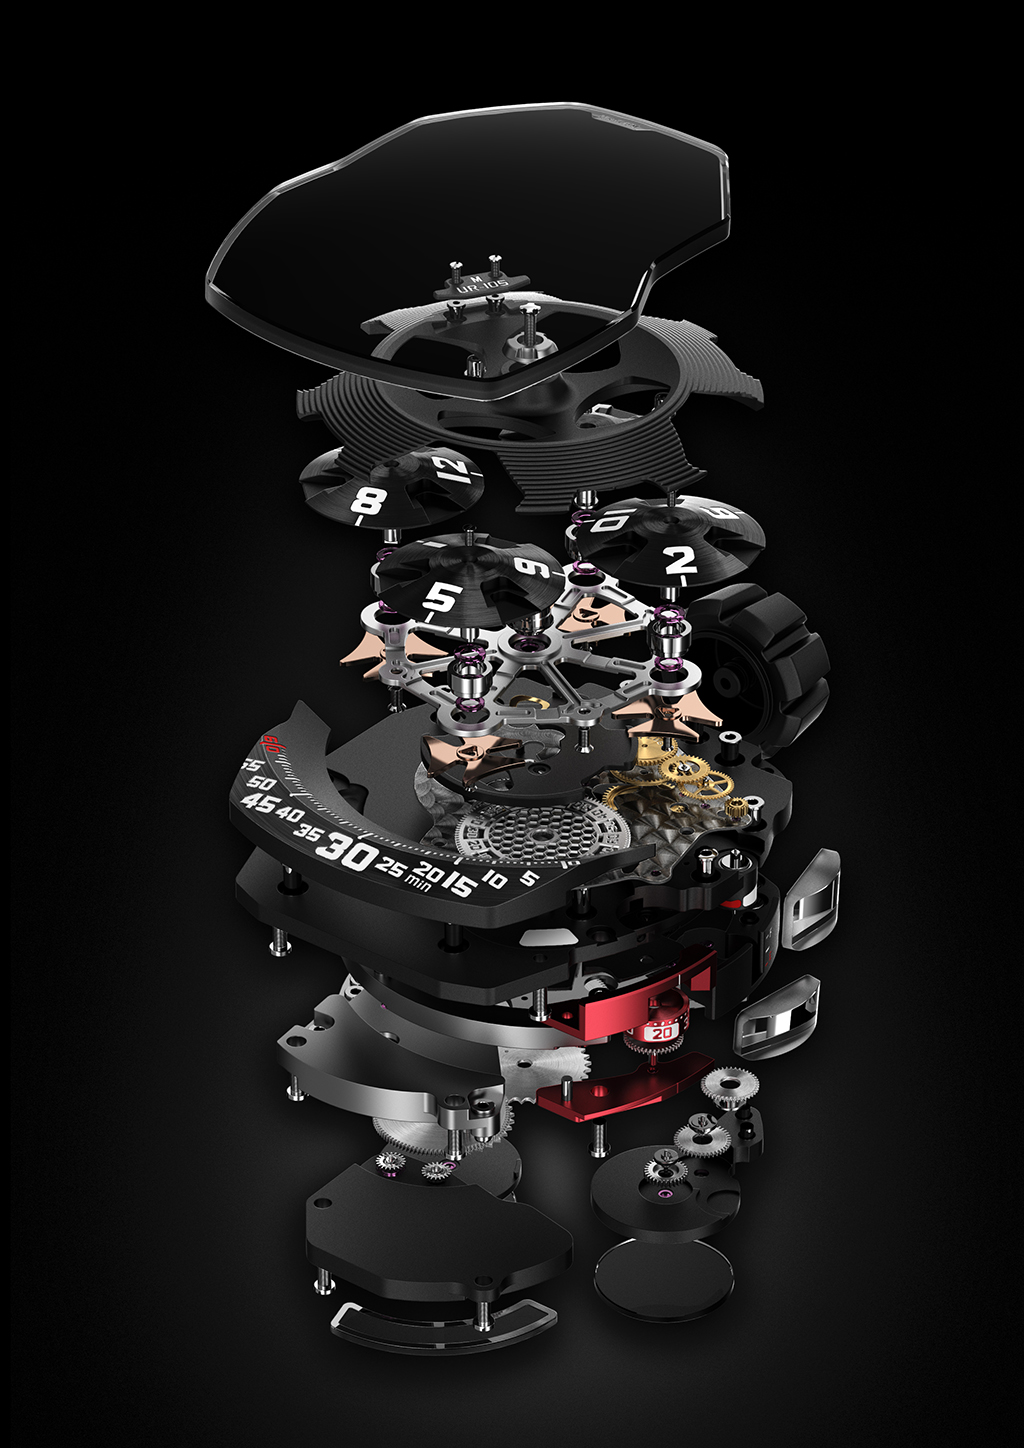 Exploded view of the movement: Caliber UR5.01 with 38 jewels, beating at 28,800 bph and a power reserve of 42 hours.